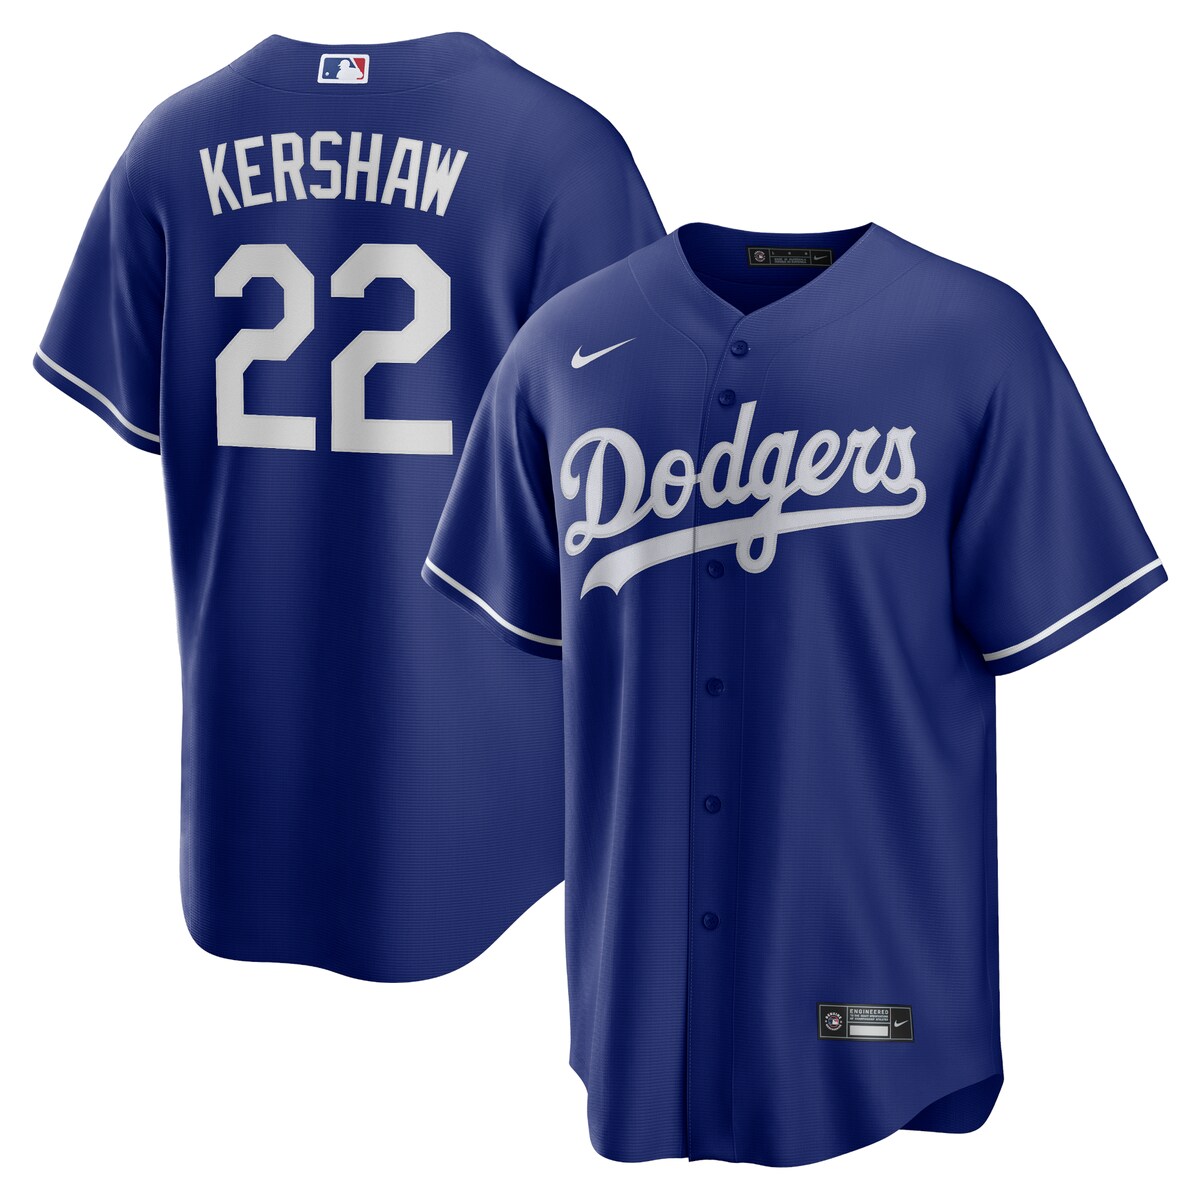 You're the type of Los Angeles Dodgers fan who counts down the minutes until the first pitch. When your squad finally hits the field, show your support all game long with this Clayton Kershaw Replica Player jersey from Nike. Its classic full-button design features the name and number of your favorite player in crisp applique graphics, leaving no doubt you'll be along for the ride for all 162 games and beyond this season.Brand: NikeImportedOfficially licensedMLB Batterman applique on center back neckHeat-sealed jock tagMachine wash gentle or dry clean. Tumble dry low, hang dry preferred.Material: 100% PolyesterFull-button frontHeat-sealed transfer appliqueRounded hem